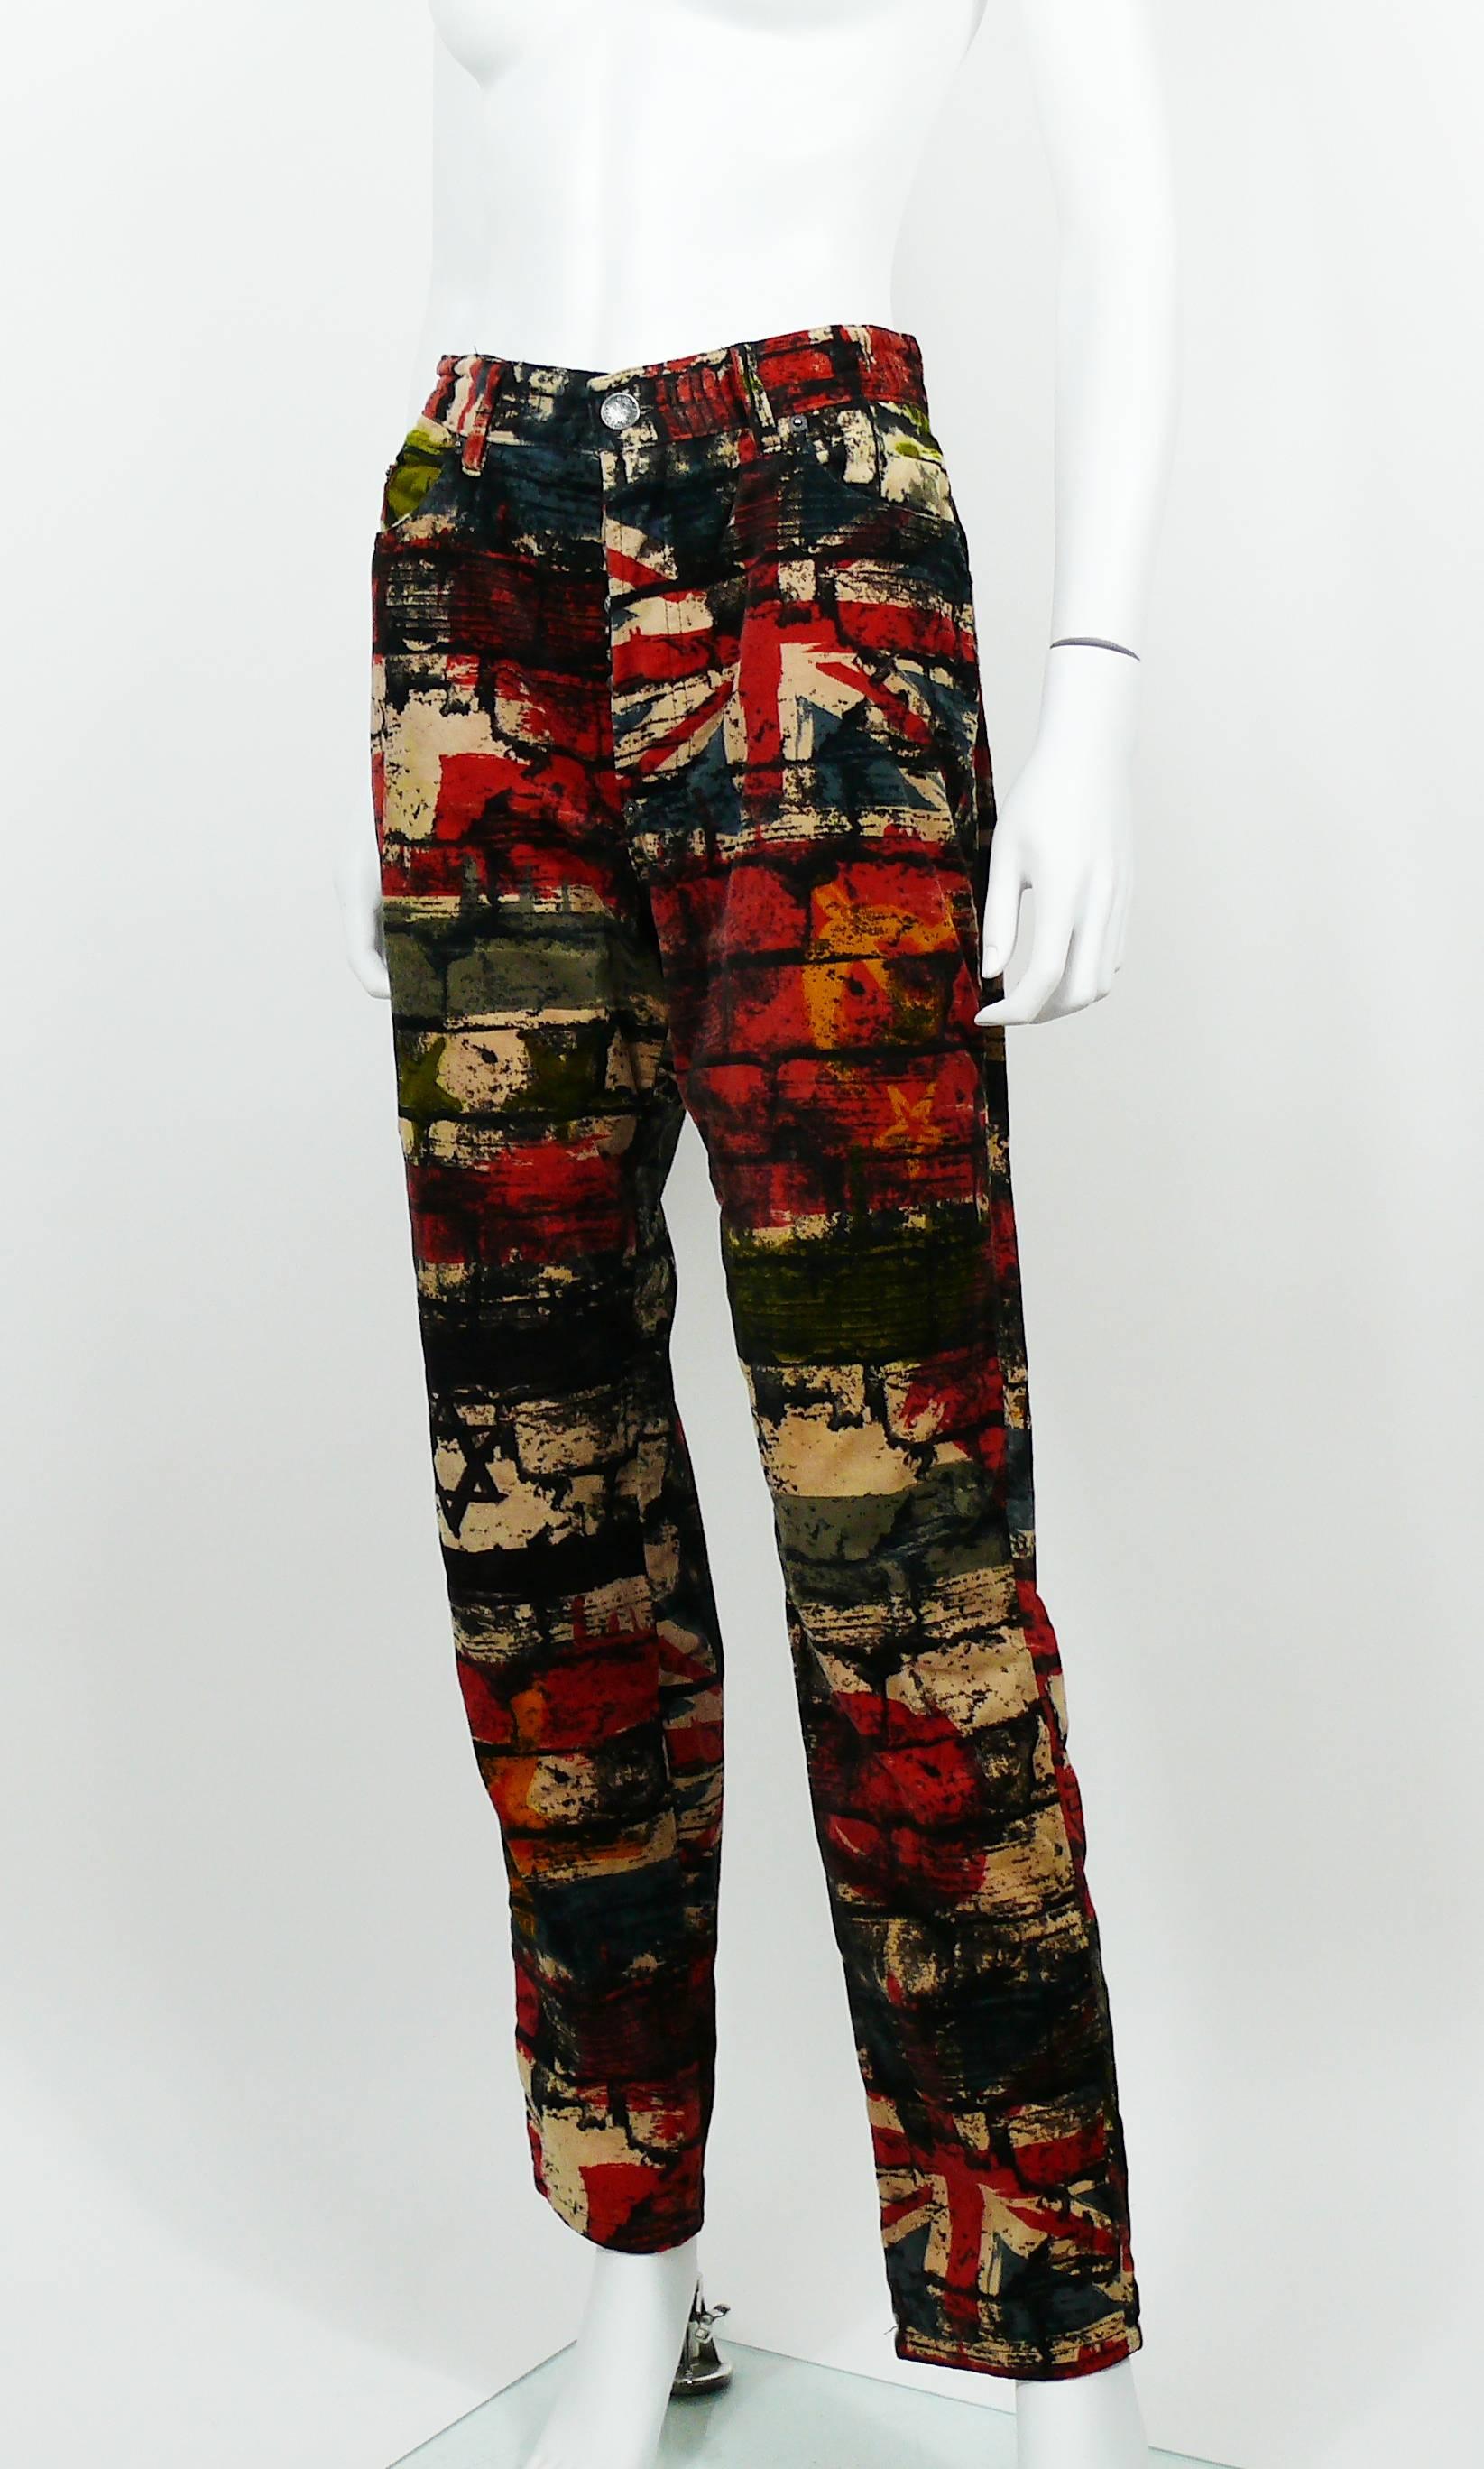 Black Jean Paul Gaultier Vintage Wall and Flags Print Pants Trousers